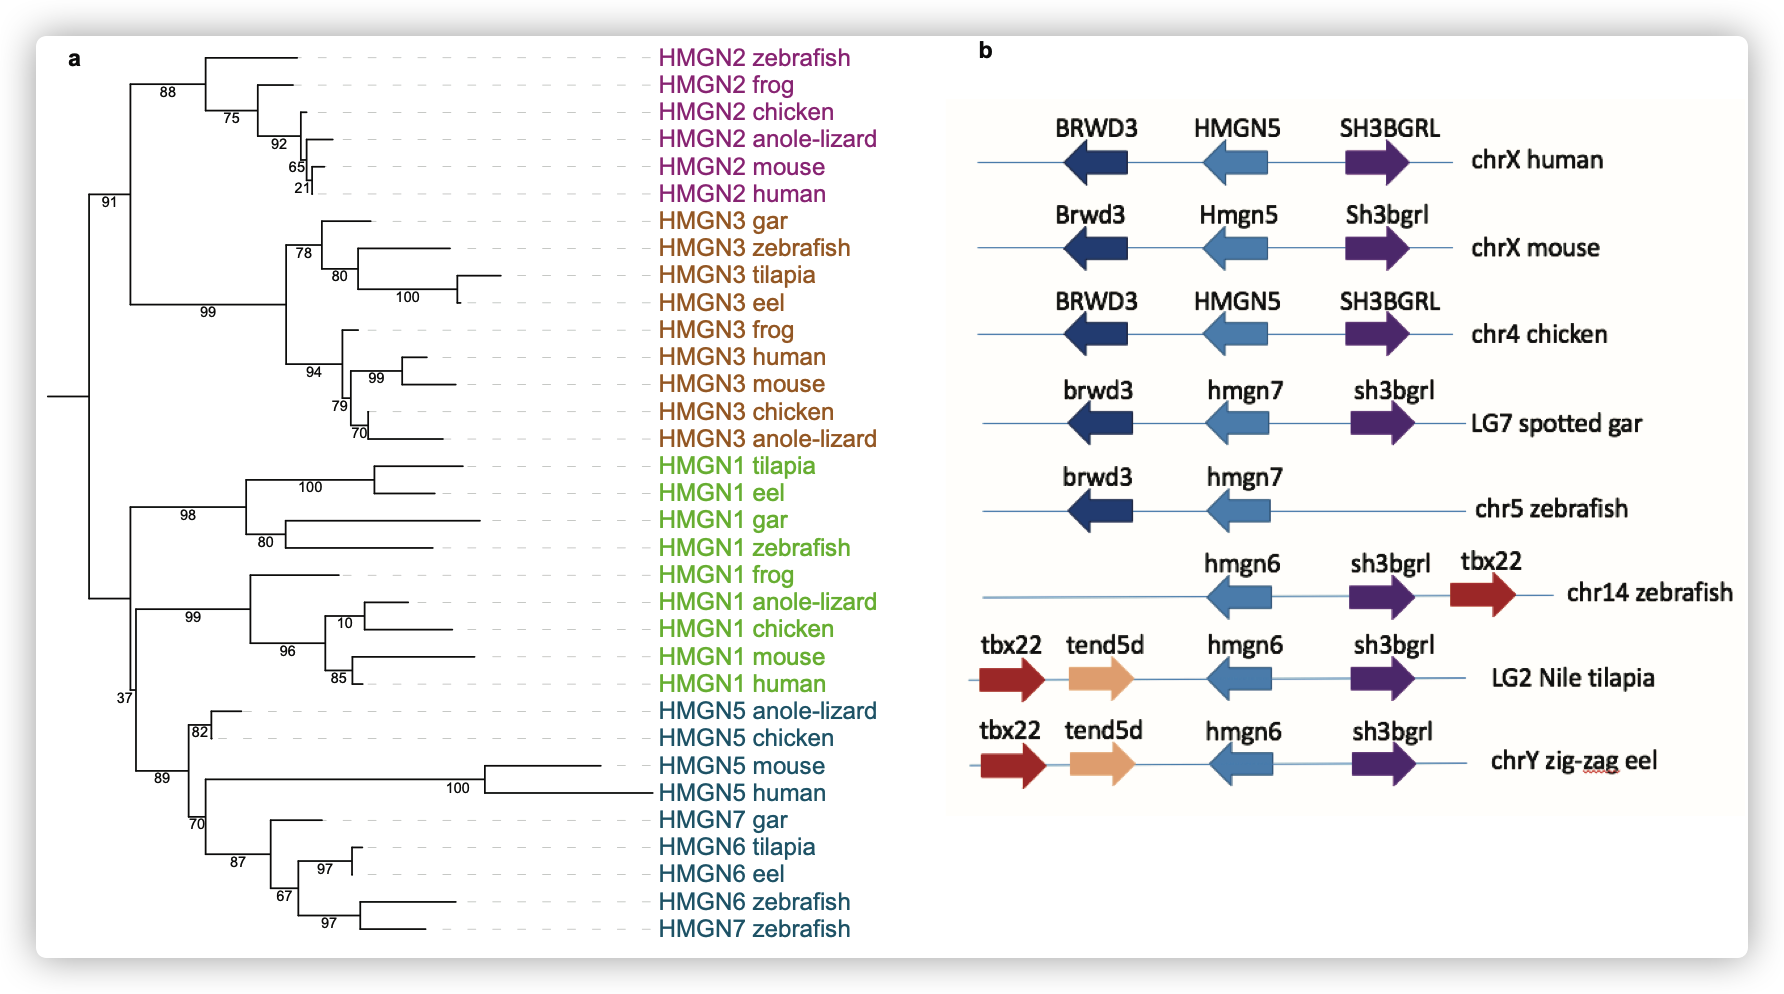 Fig S10 The phylogeny and gene synteny of HMGN6.